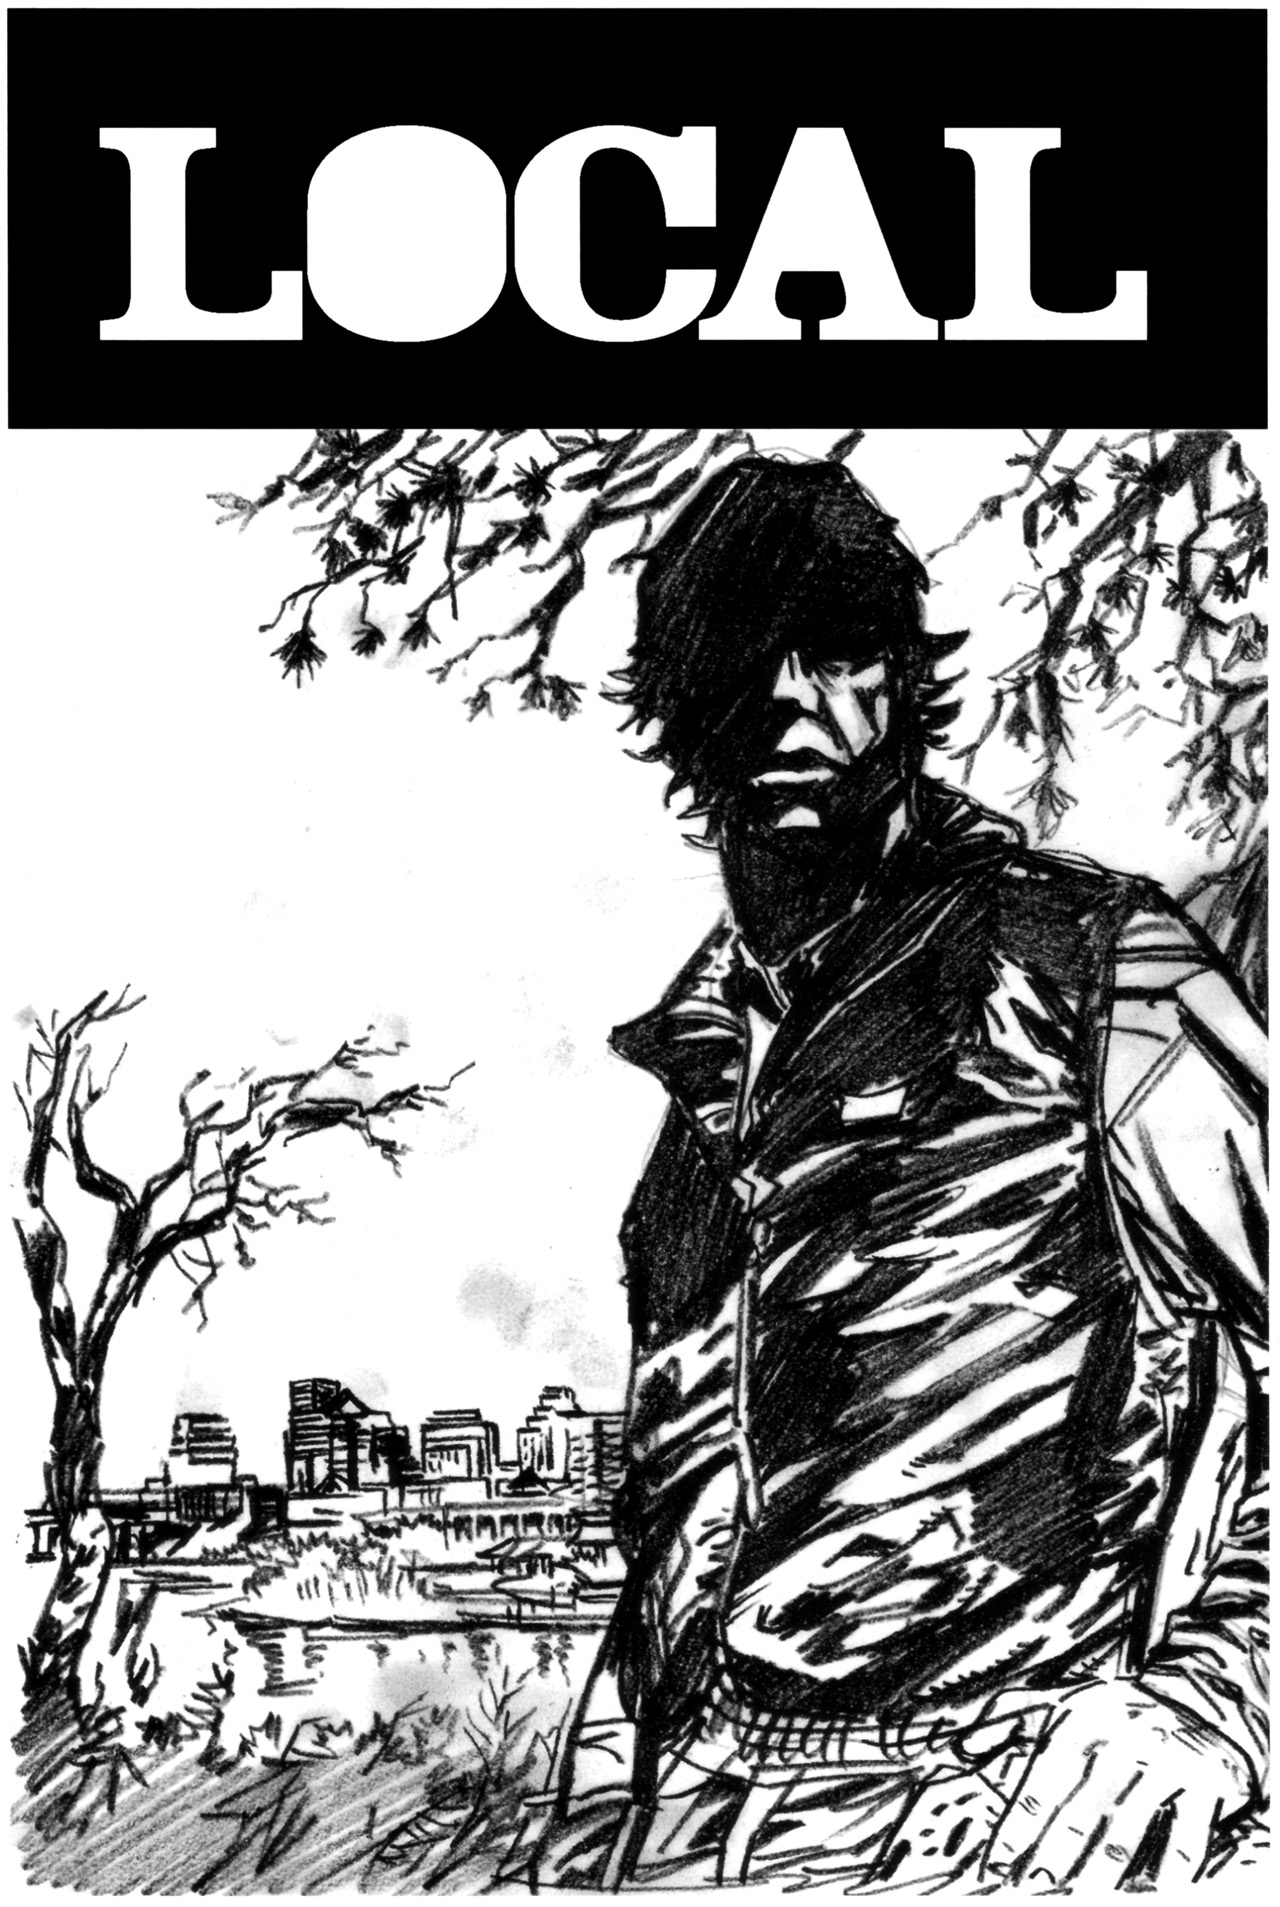 Read online Local comic -  Issue #10 - 29